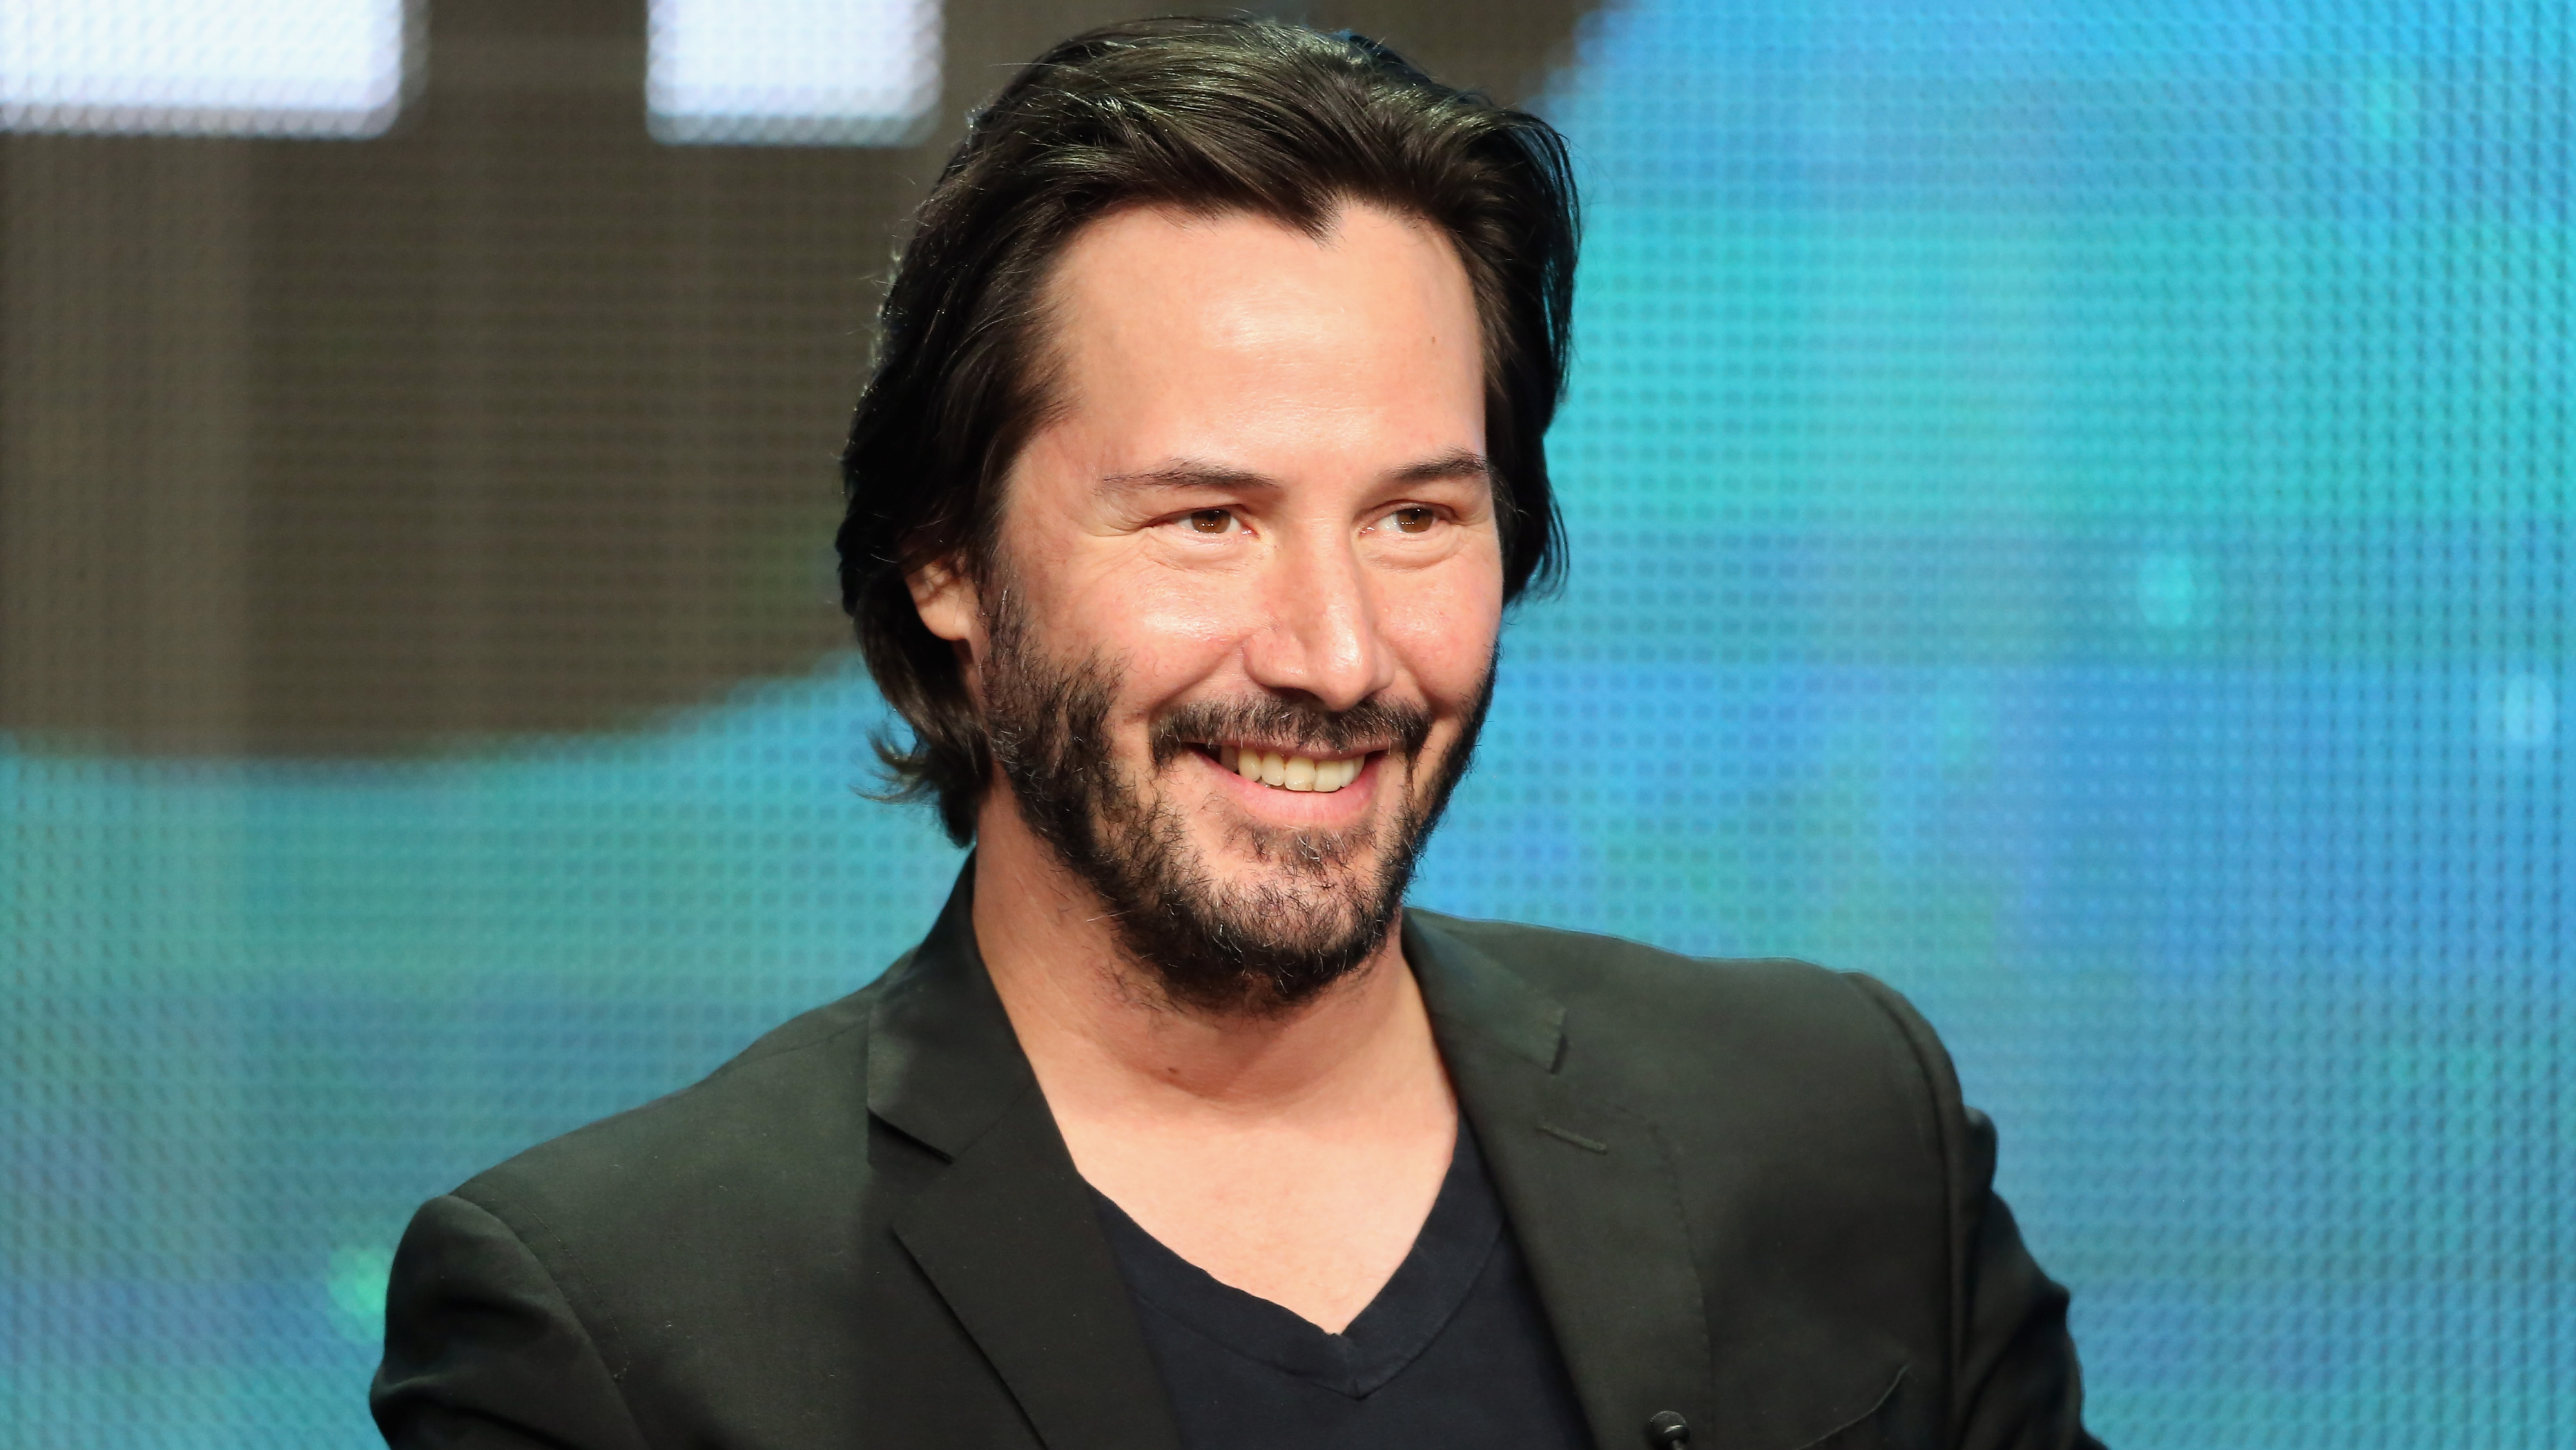 The Internet Is Petitioning to Make Keanu TIME's Person of the Year